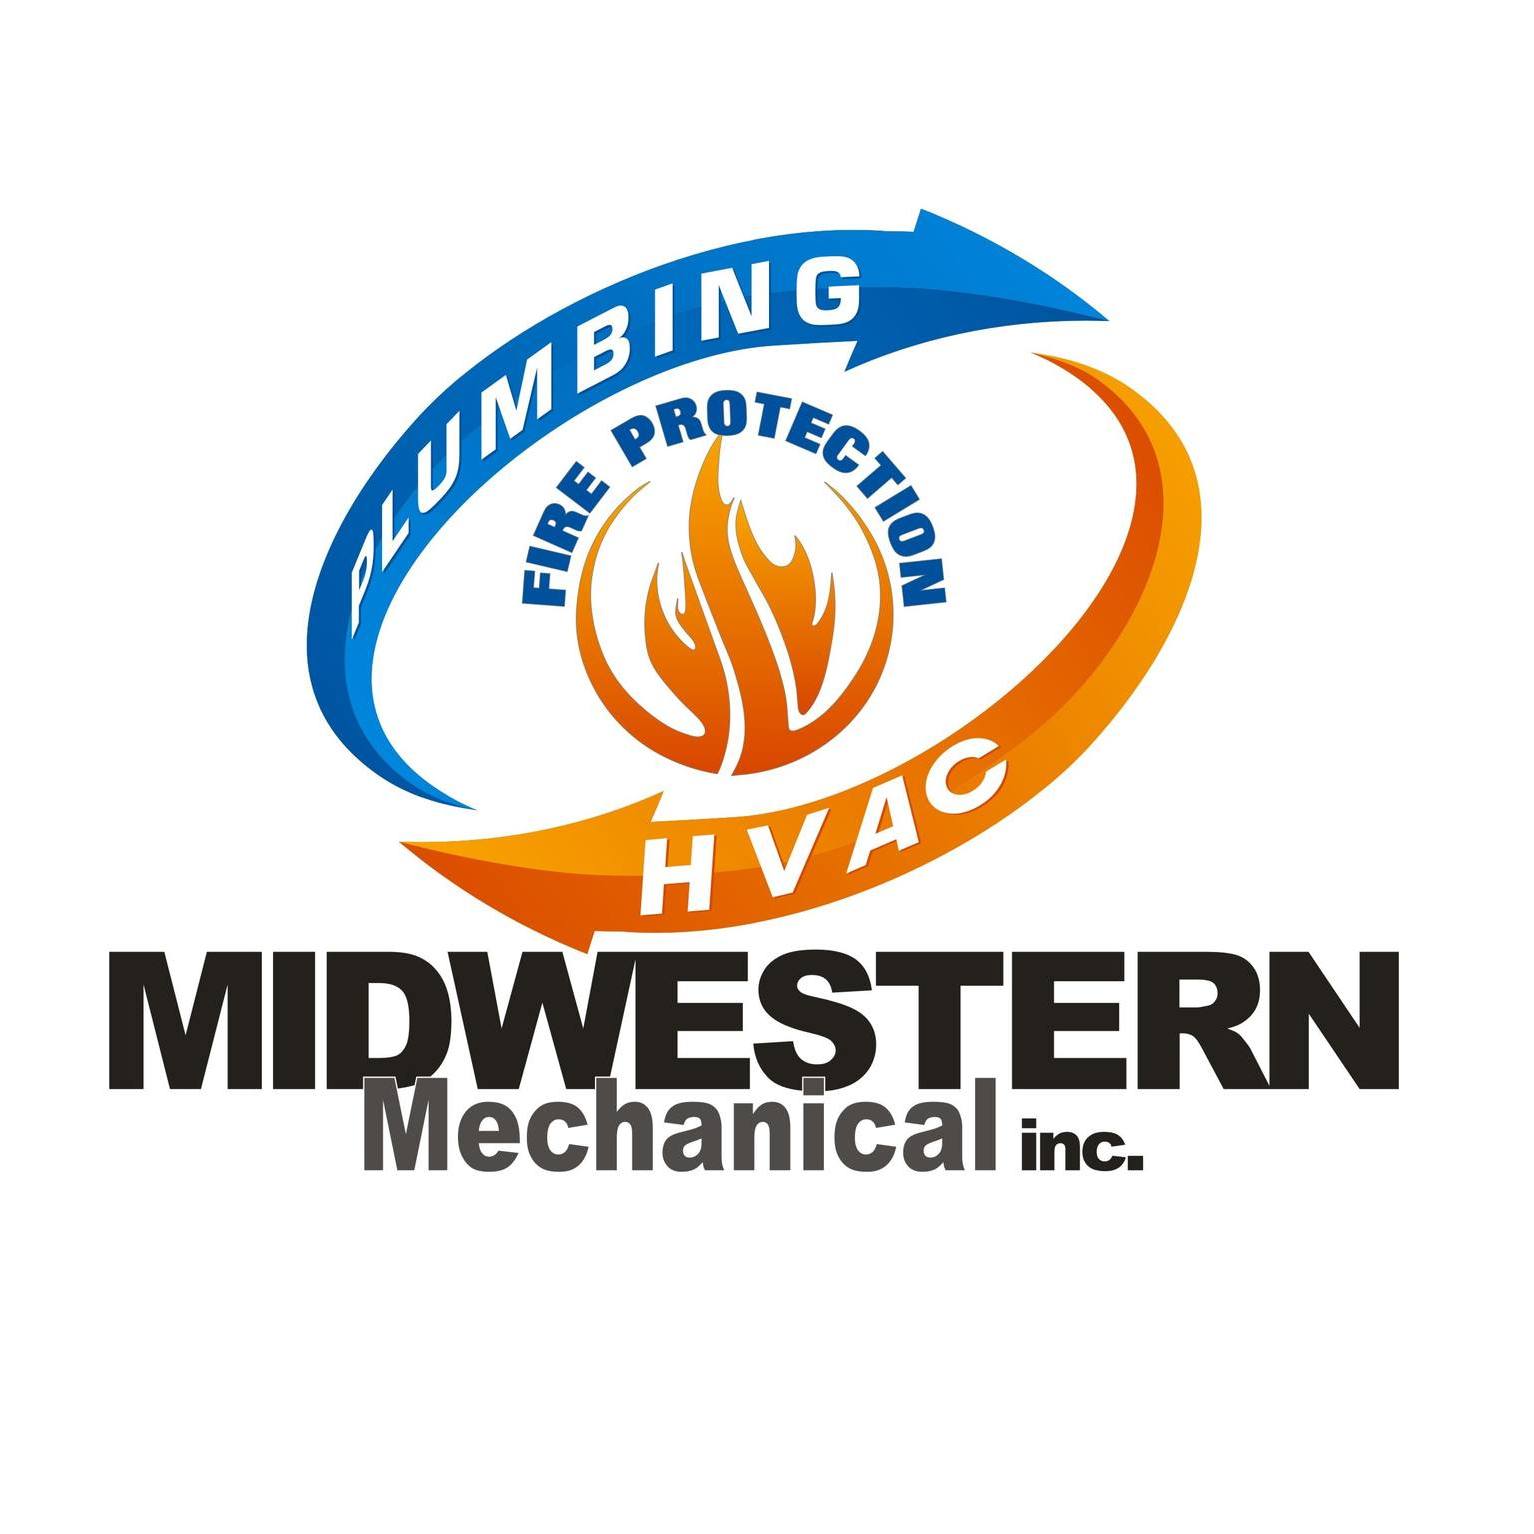 Midwestern Mechanical